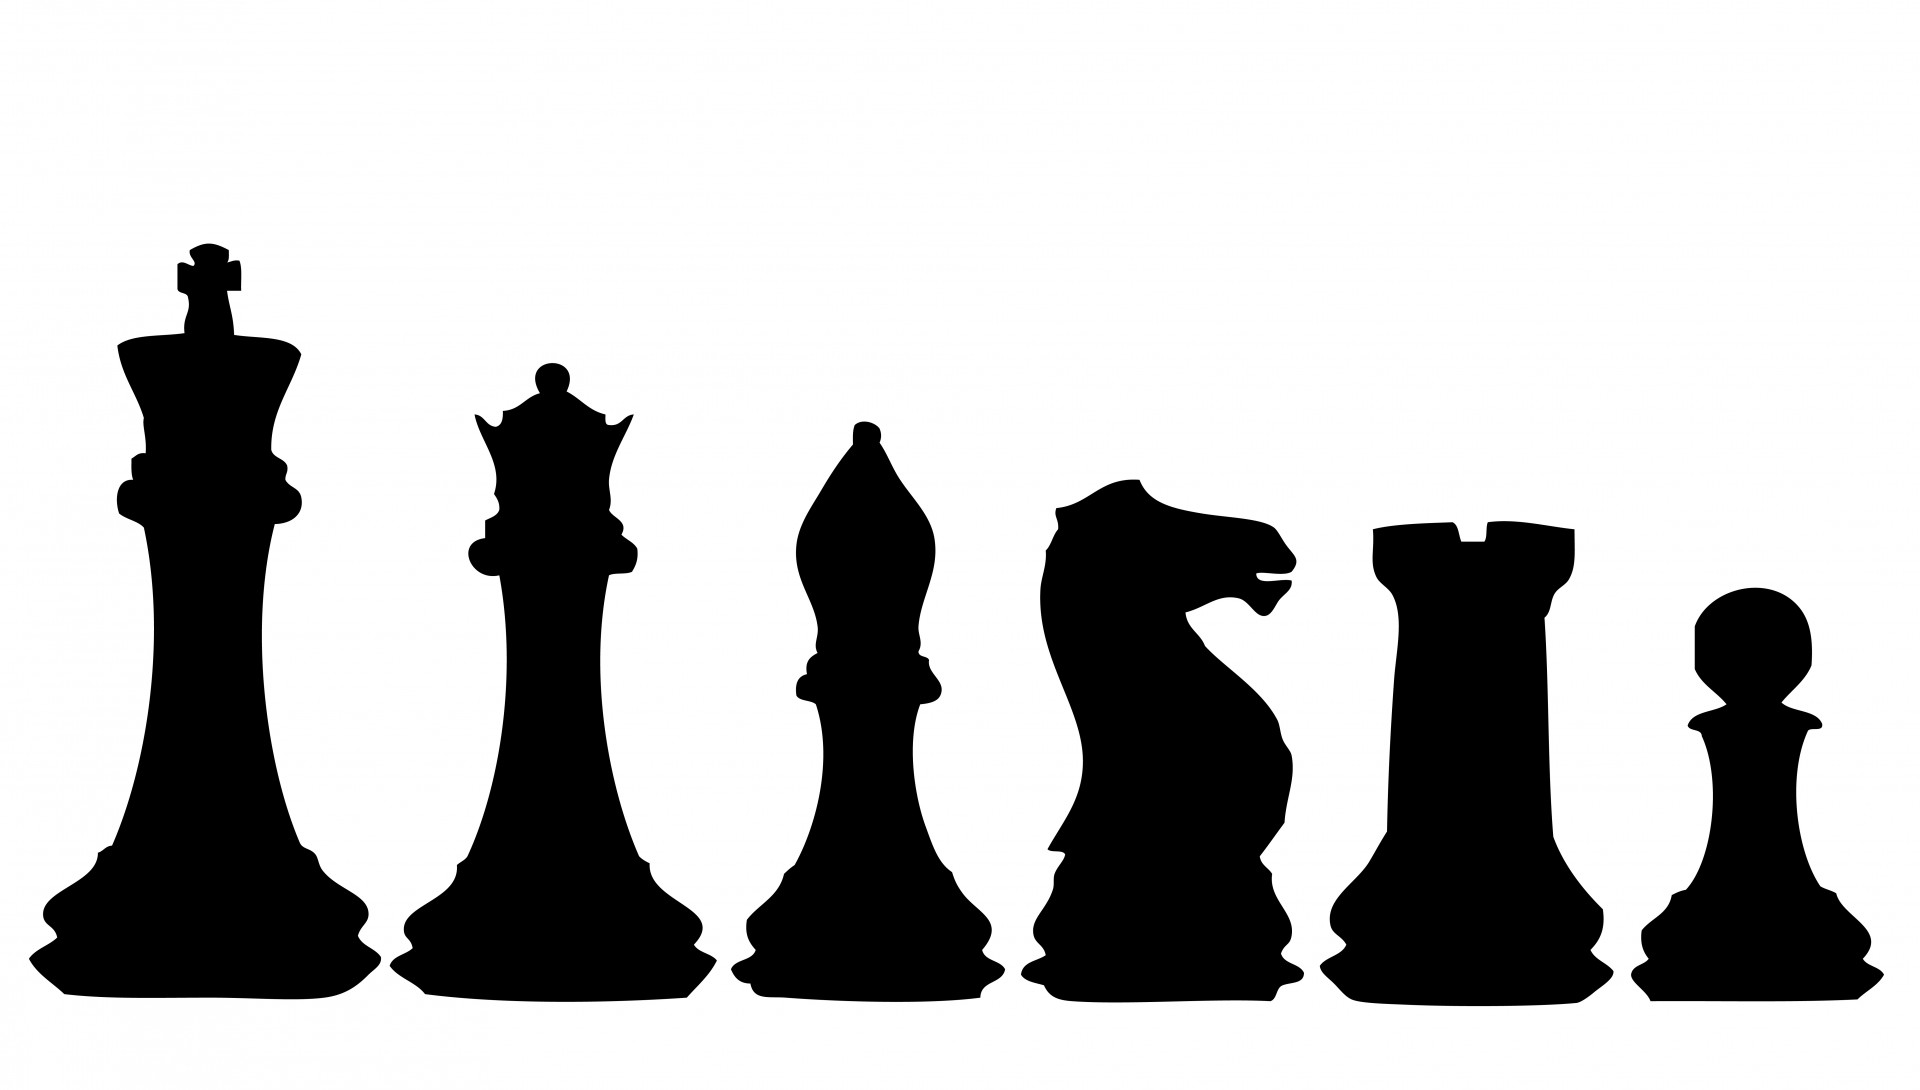 game pawn clipart - photo #28